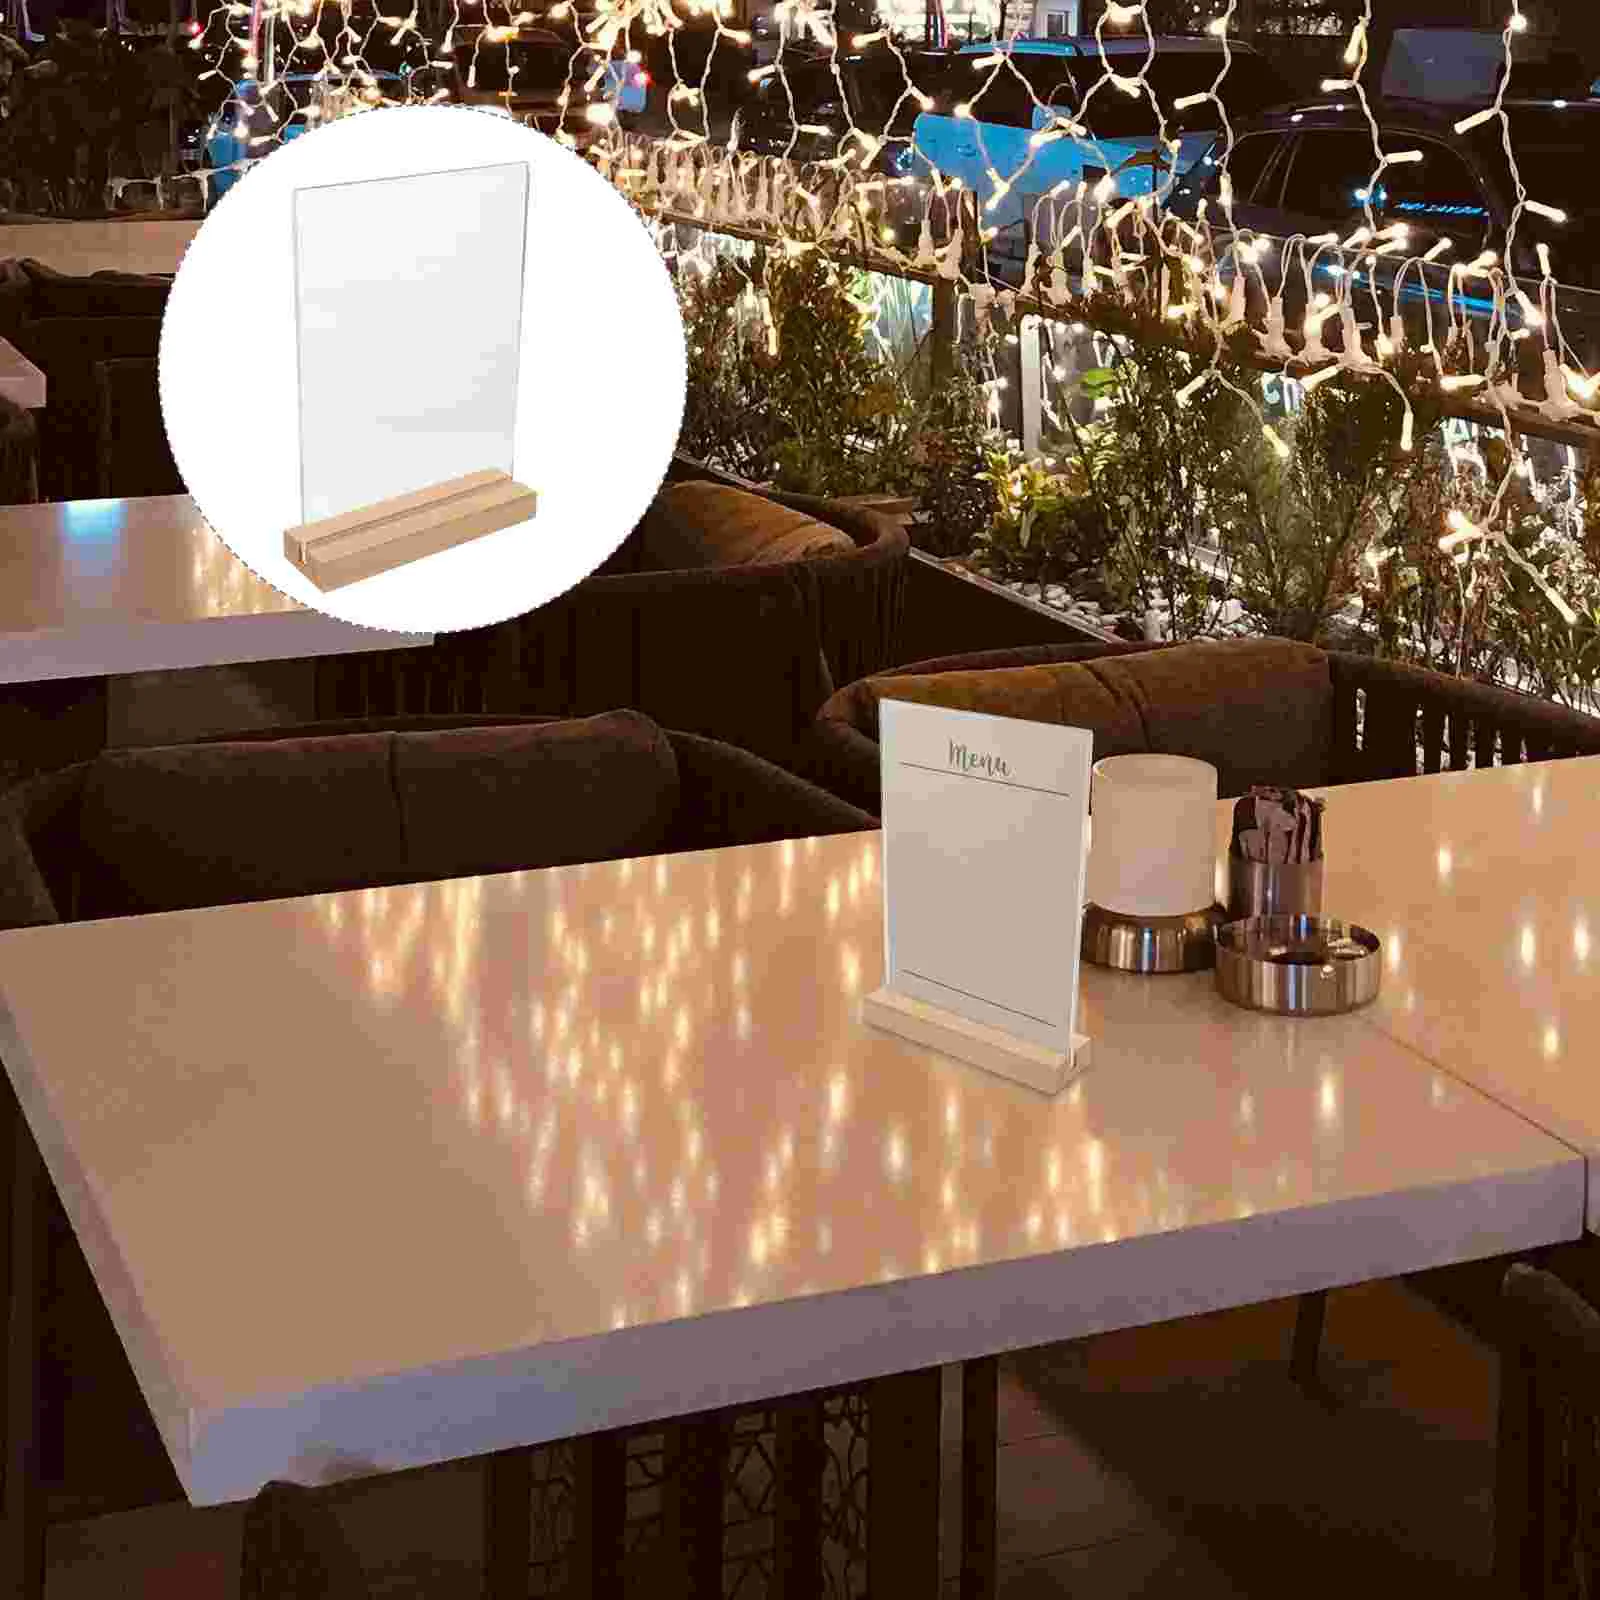 Clear Menu Display Stand Desktop Poster Holder Acrylic Sign Holder for Restaurants with Wood Base 100x70mm wood base magnetic acrylic sign holder display stand baby picture photo frame small price label card tags